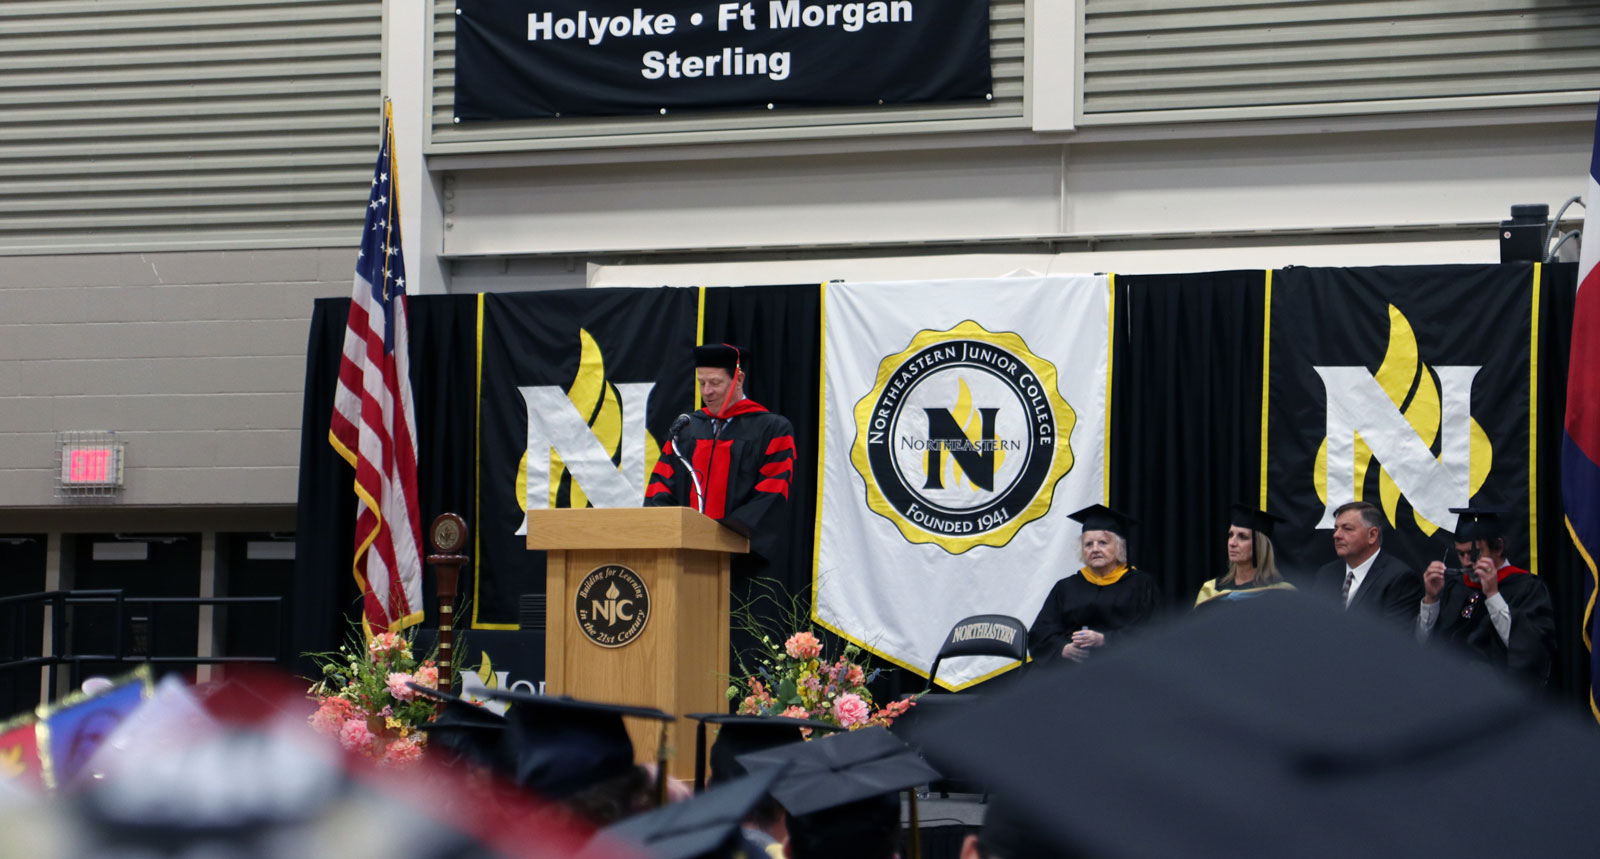 President Mike White addresses the graduates at the 80th Annual NJC Commencement Ceremony on May 12, 2023.